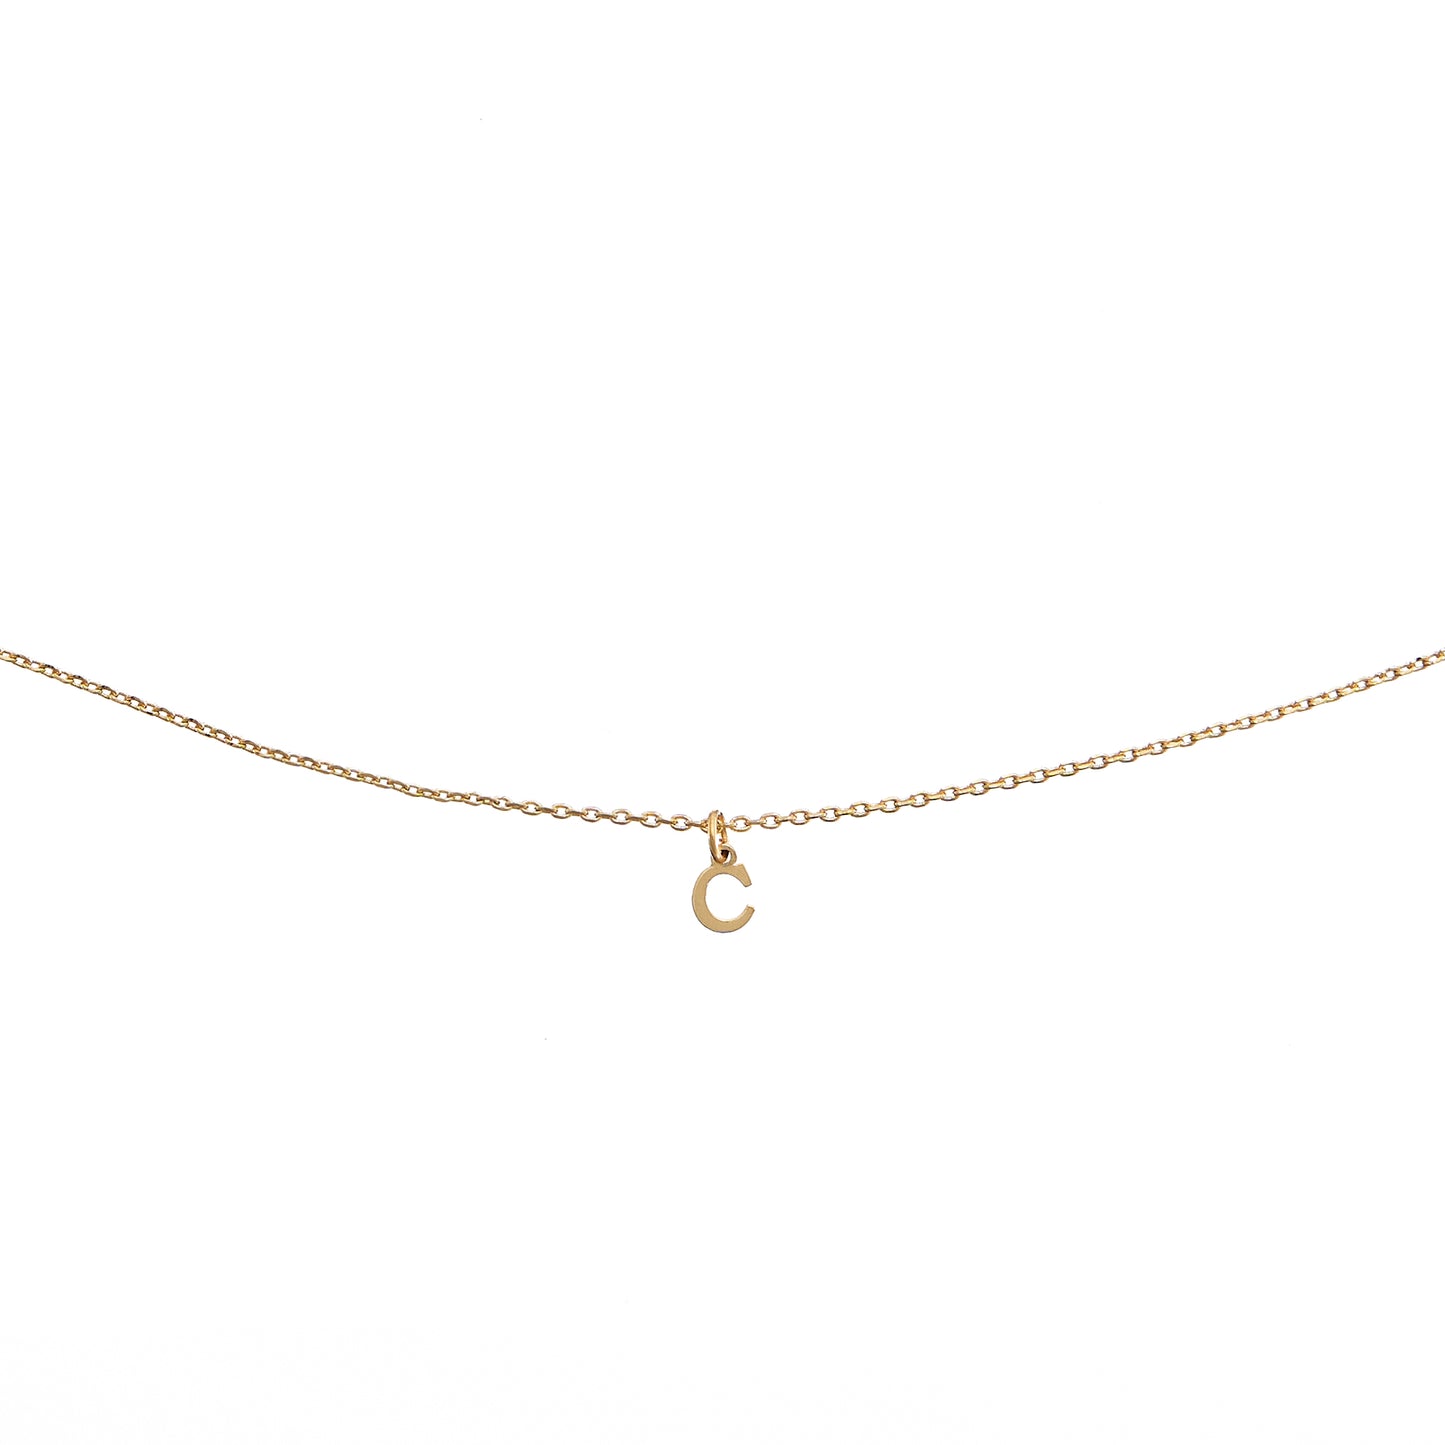 Dainty Love Initial Necklace